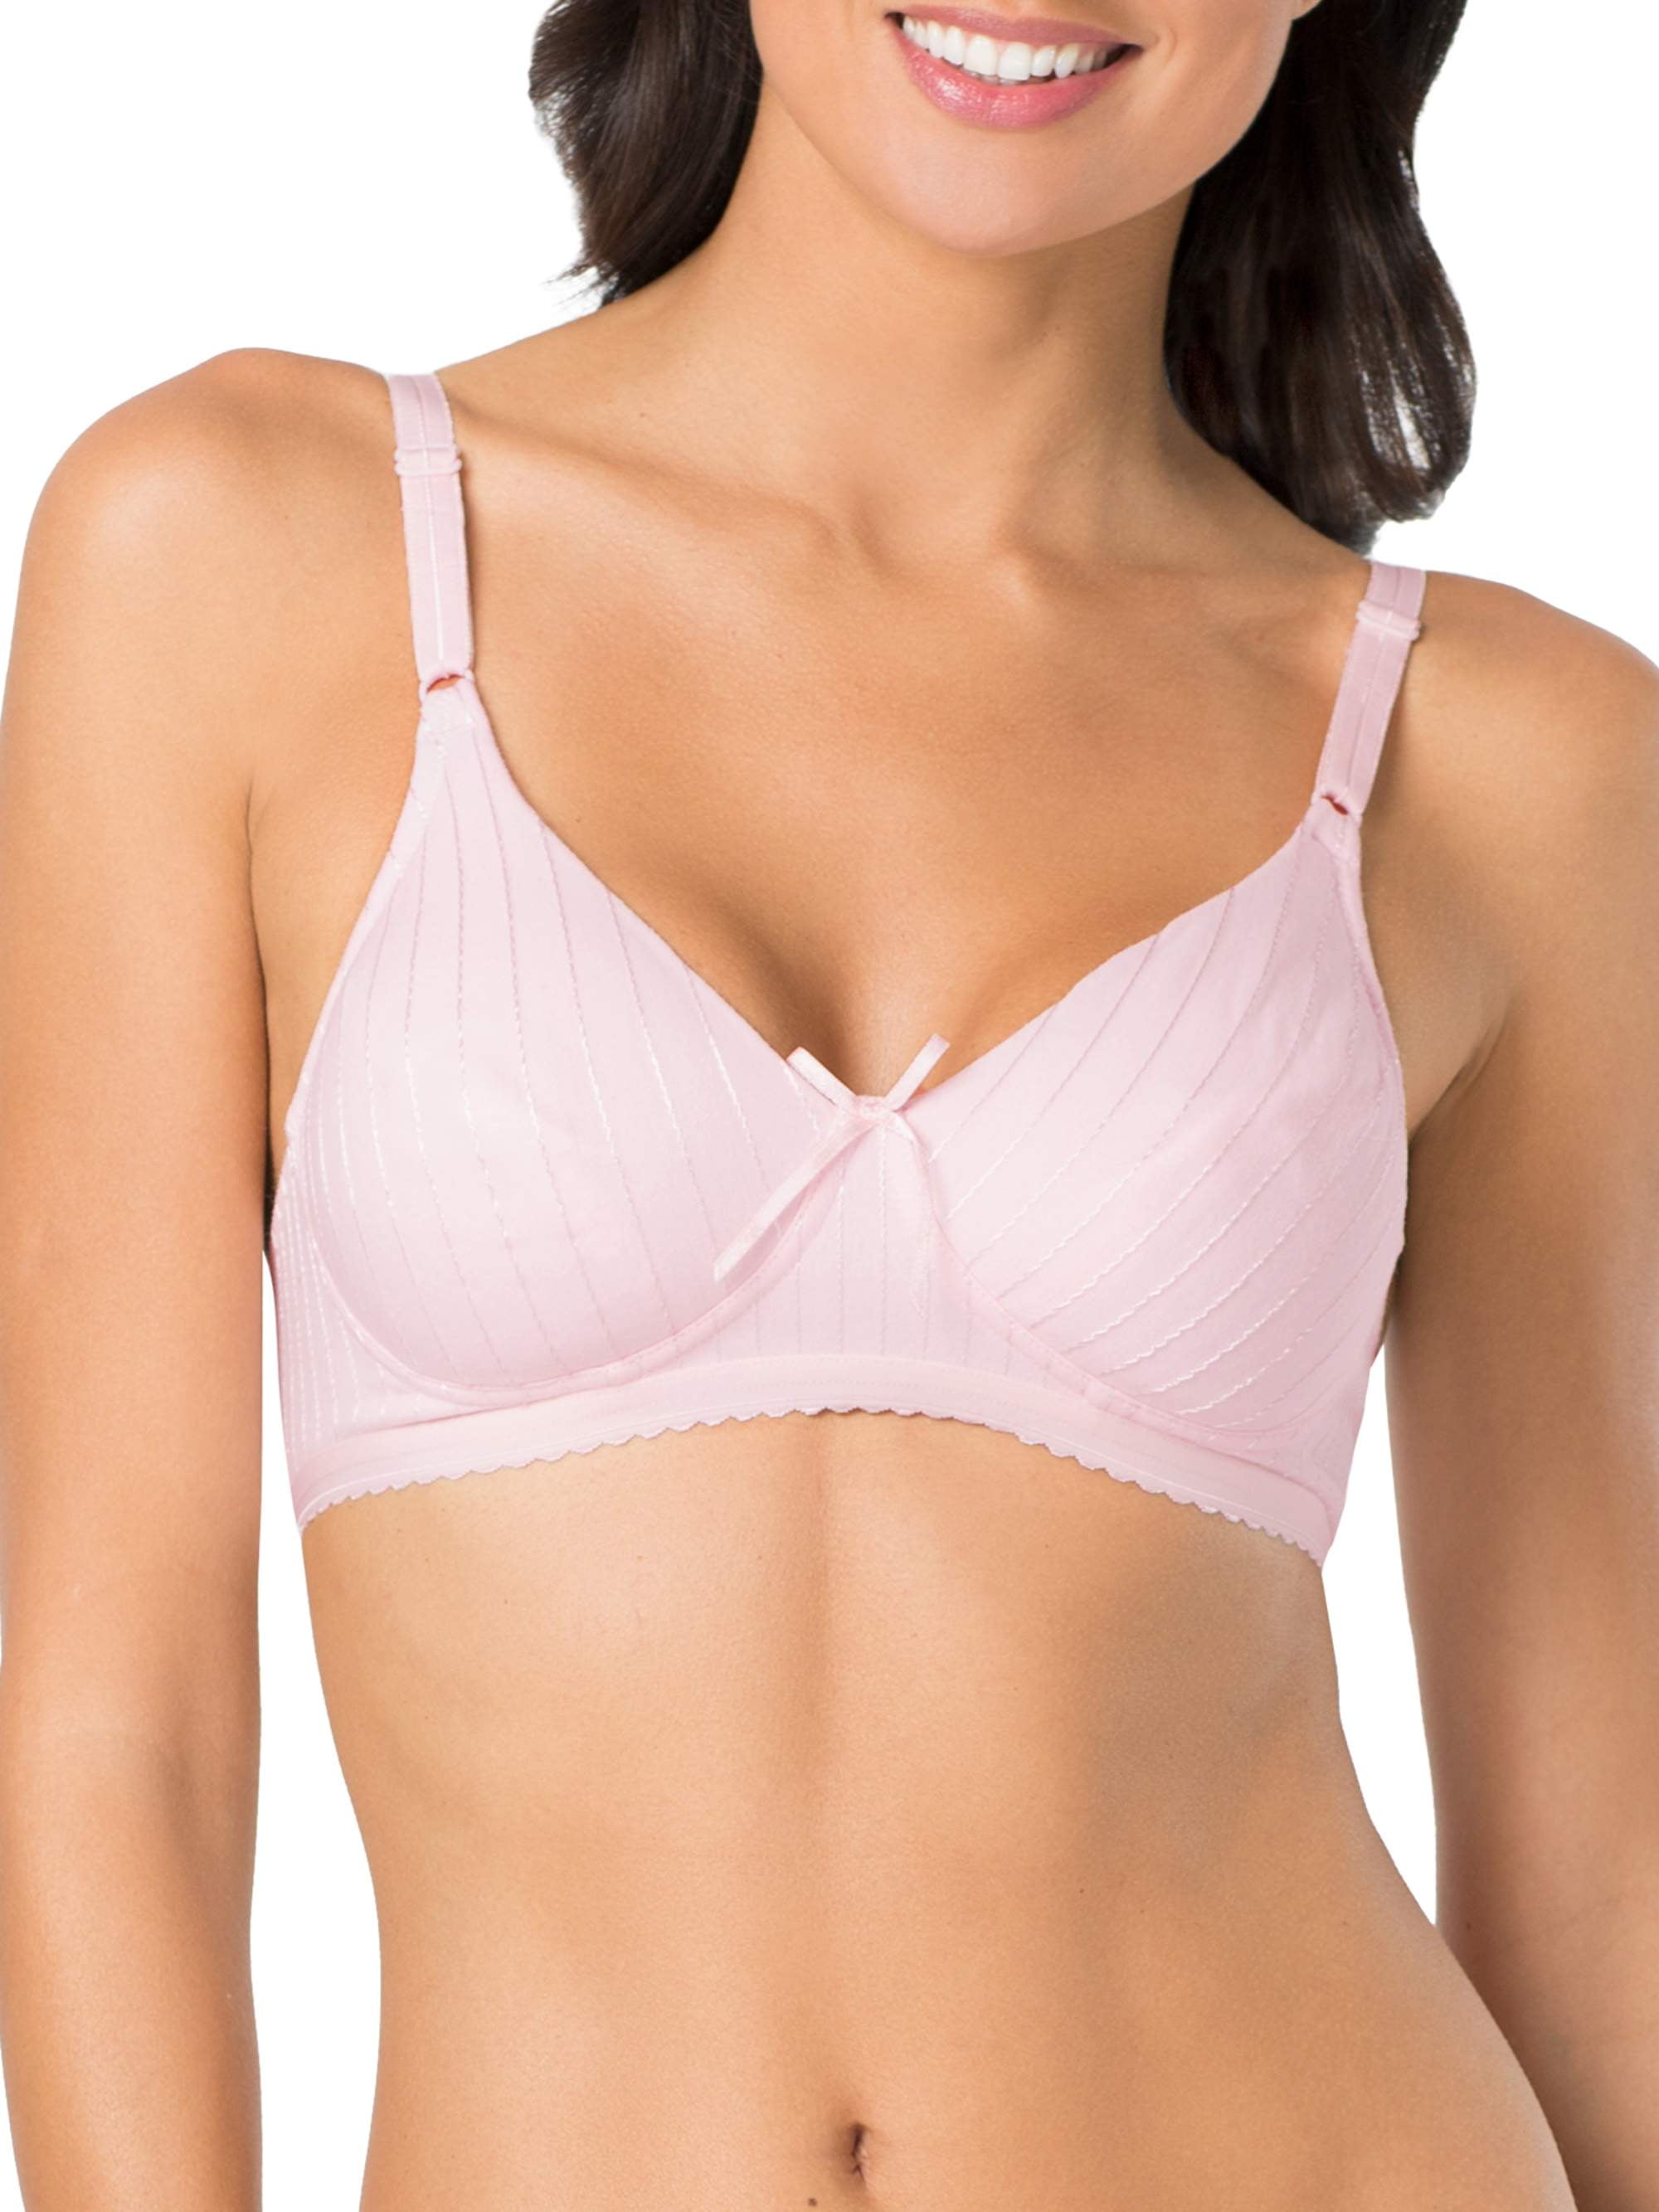 Fruit of the Loom Women's Fleece Lined Wire-free Softcup Bra